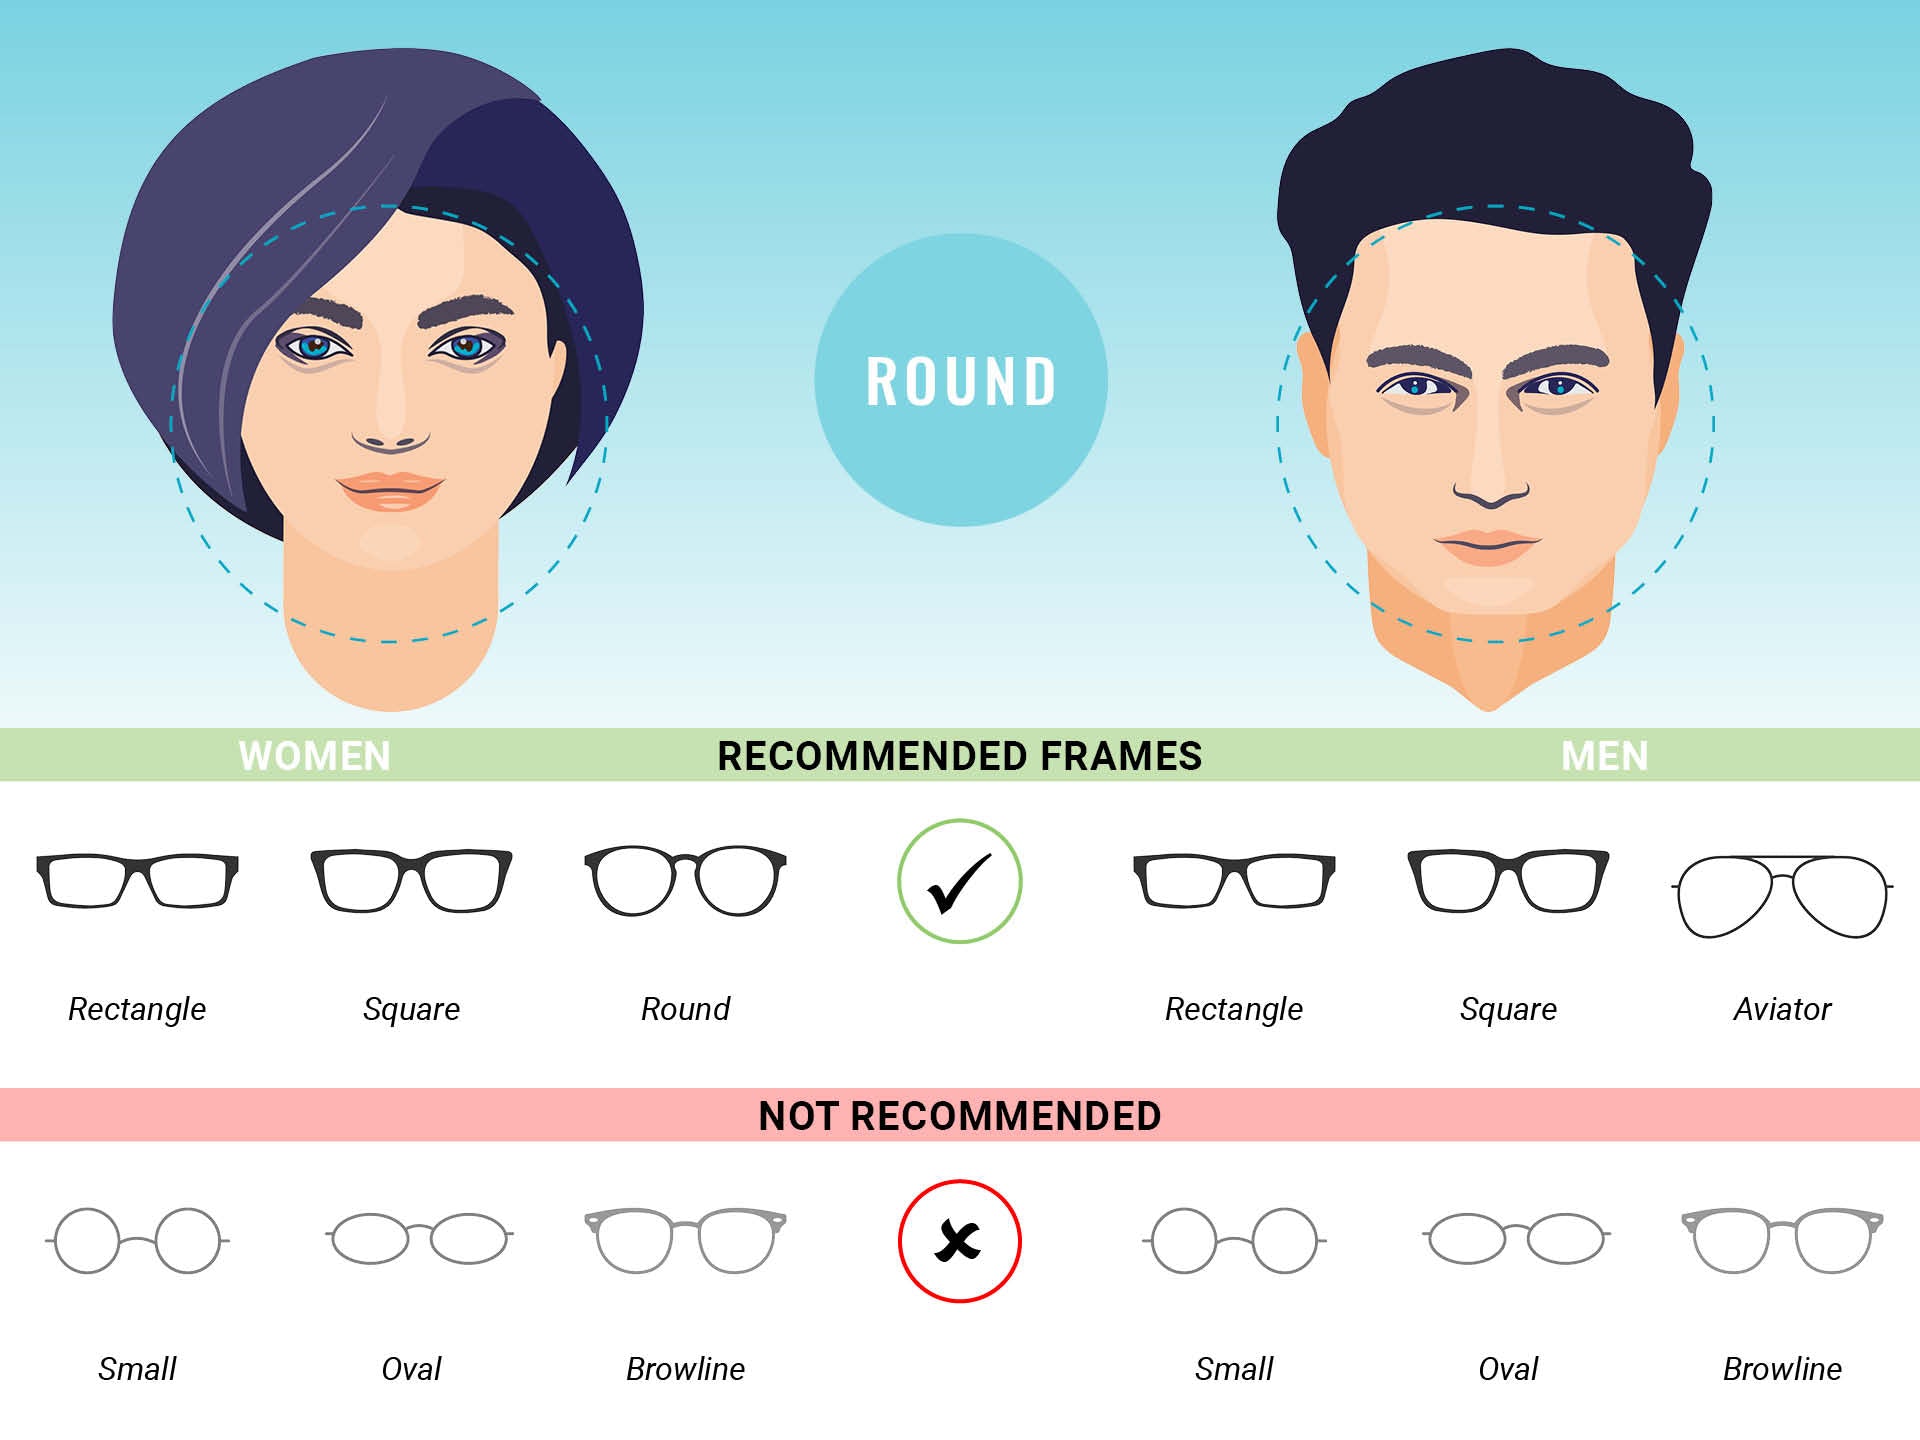 Eyeglass frame recommendations for round face shapes for men and women